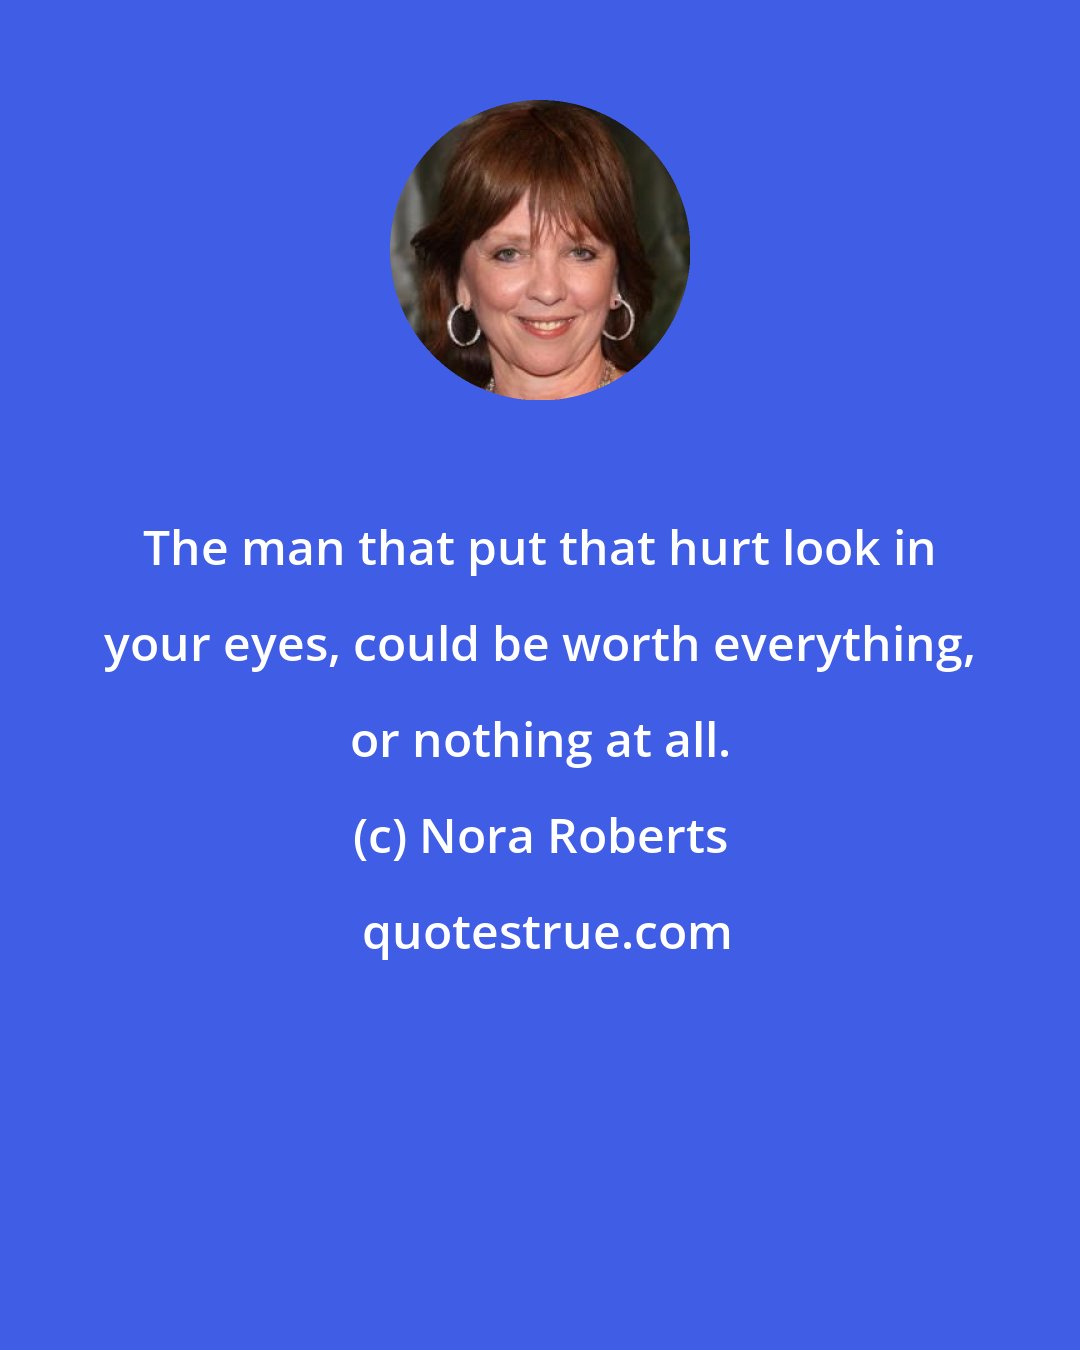 Nora Roberts: The man that put that hurt look in your eyes, could be worth everything, or nothing at all.